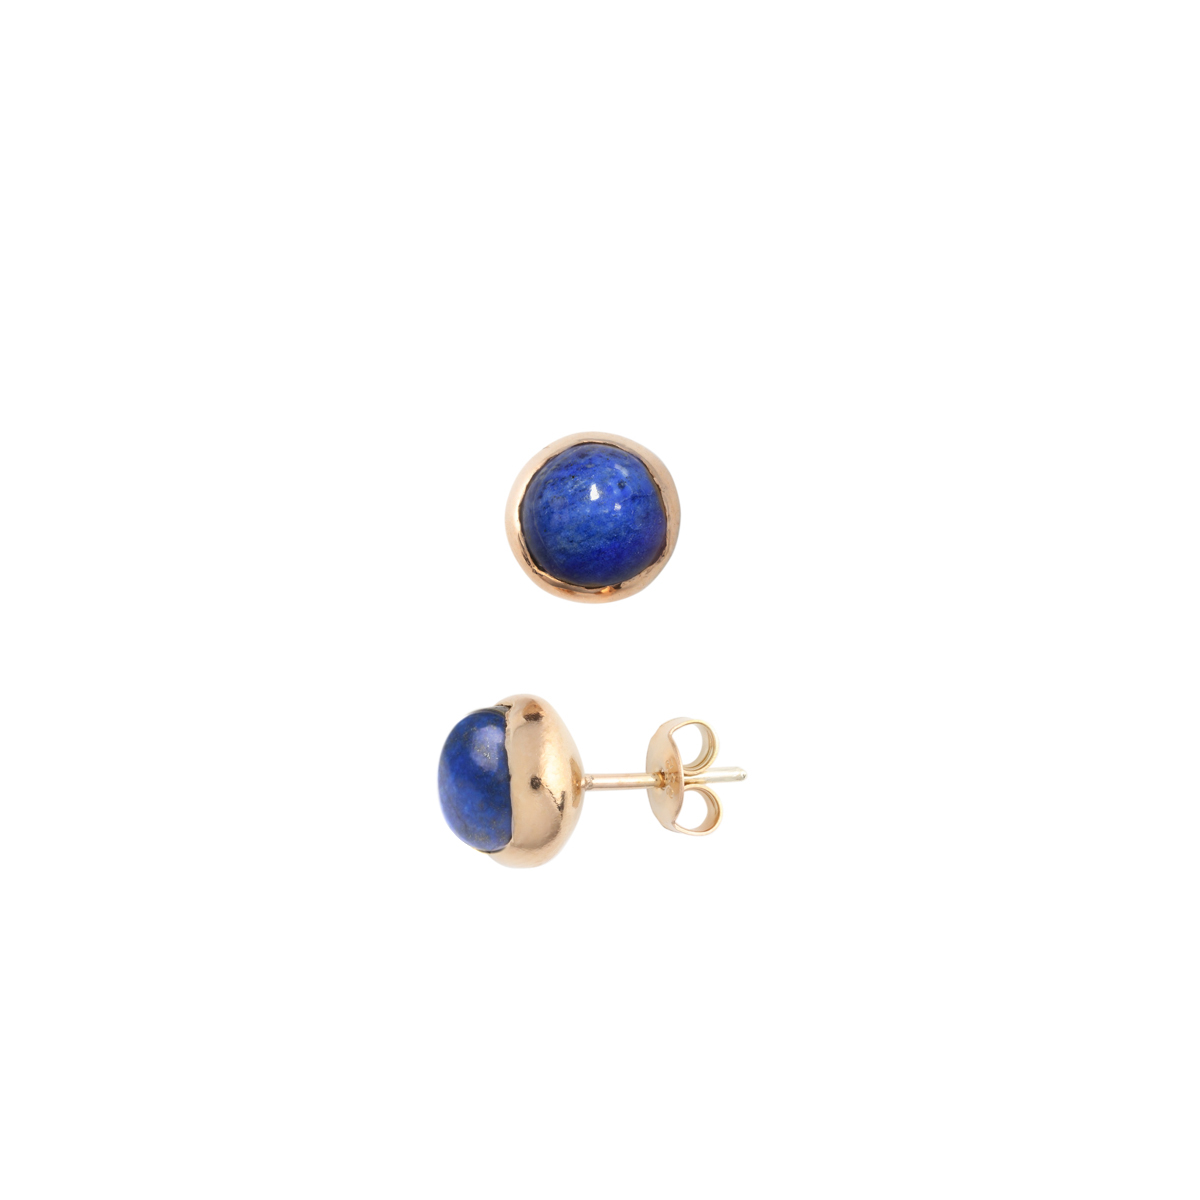 BLOSSOM Bud earrings with lapis